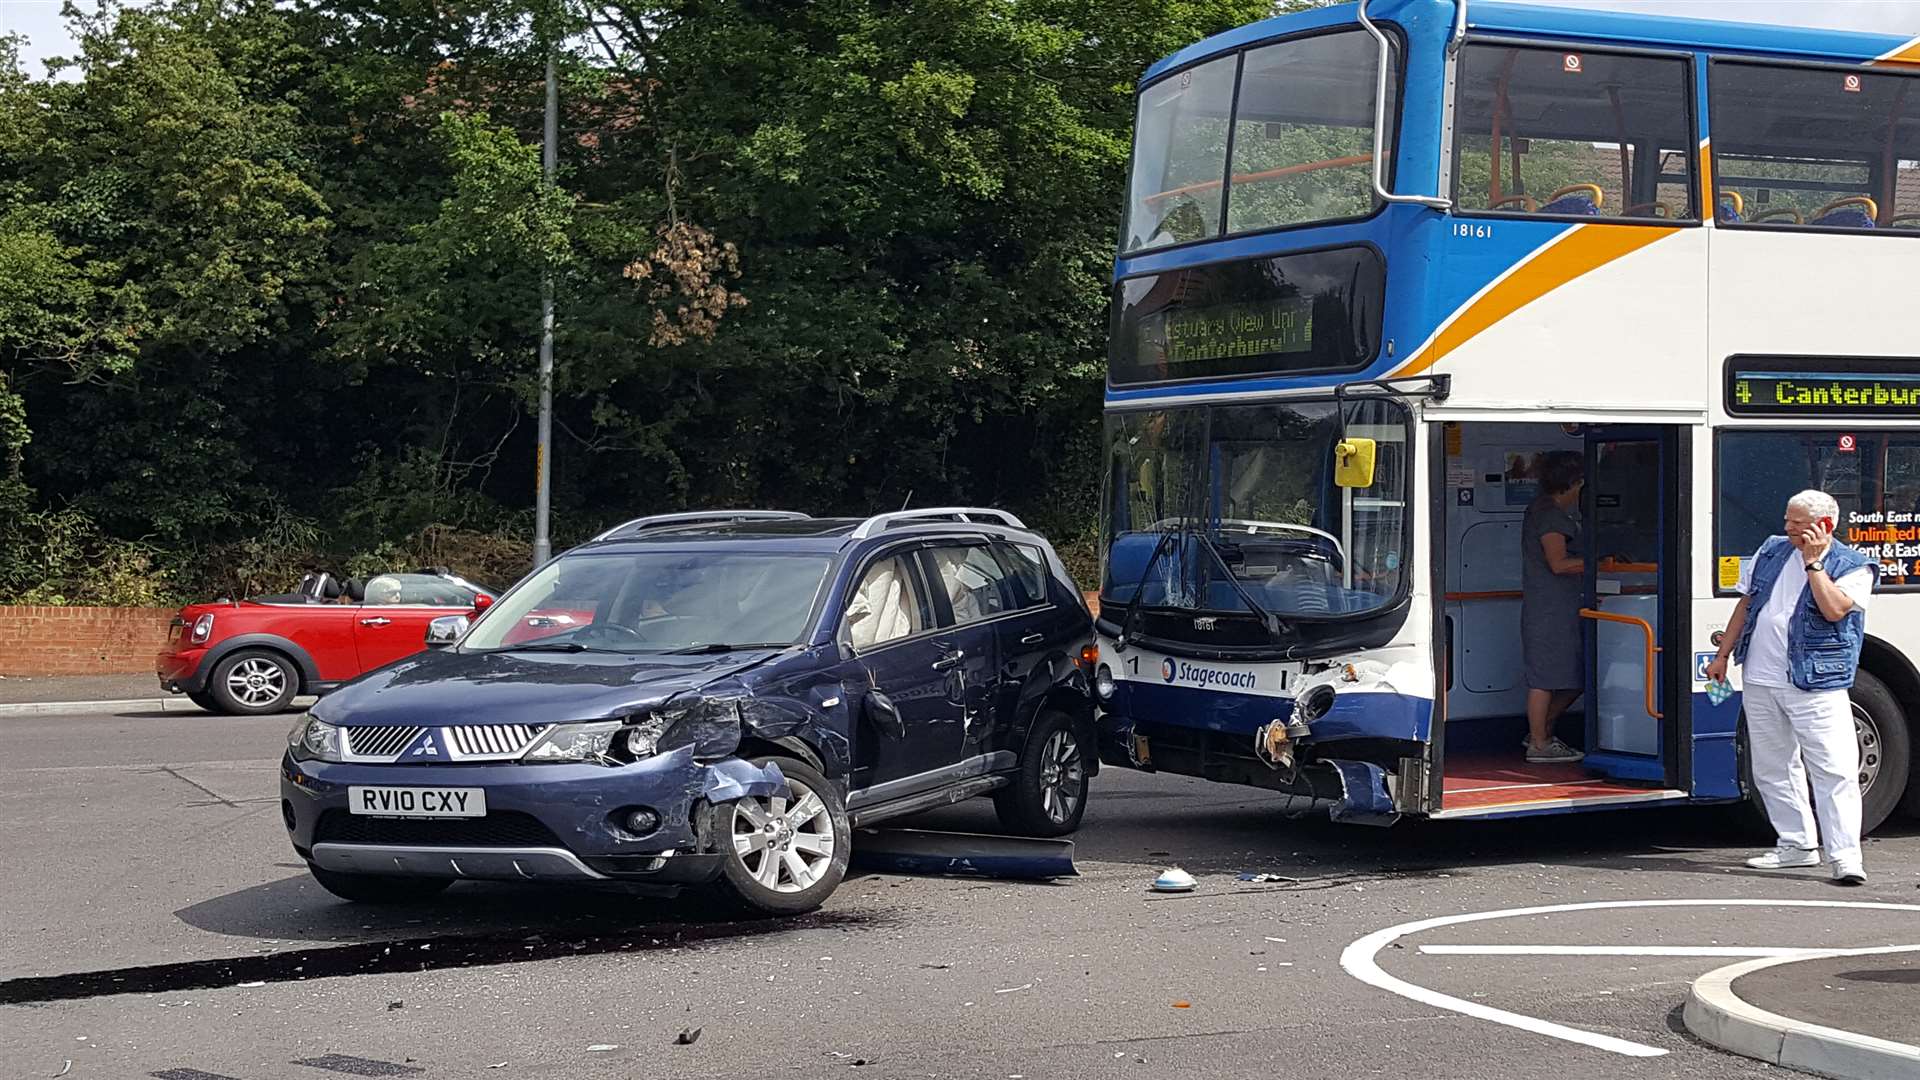 The damaged bus and car near Aldi in Whitstable